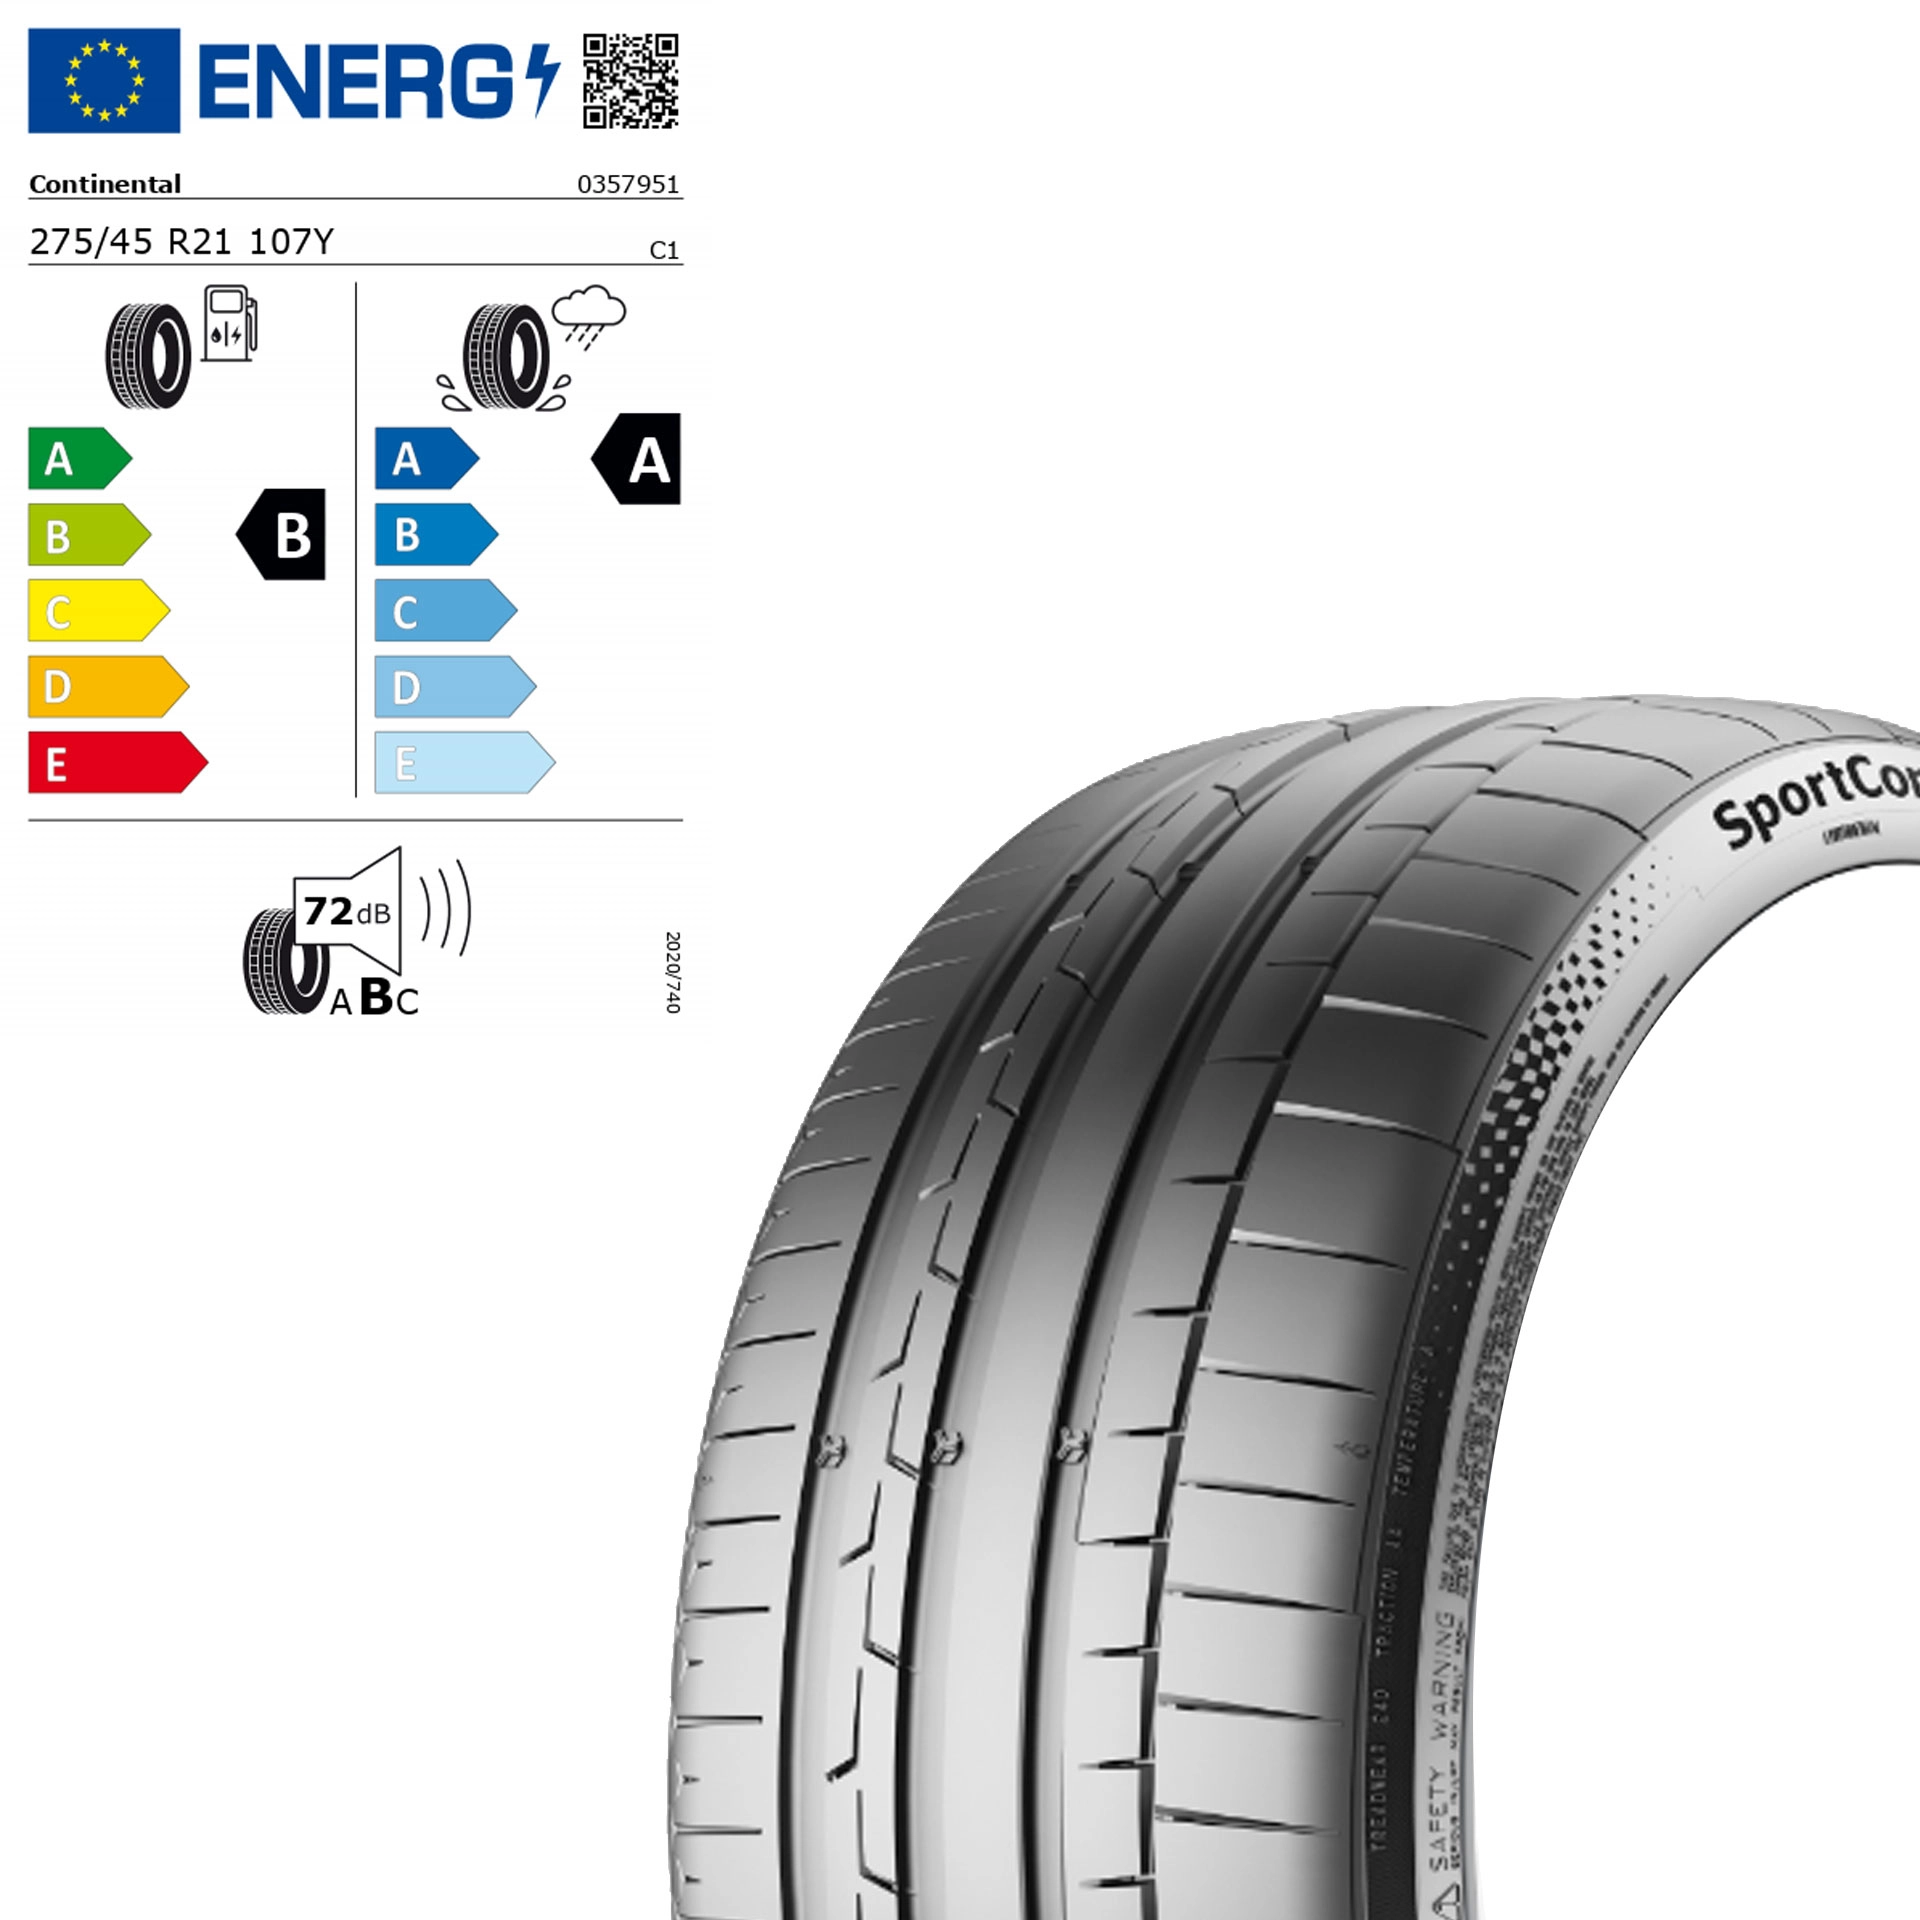 275/45 R21 107Y Continental SportContact 6 MO Sommerreifen Q44002111087A